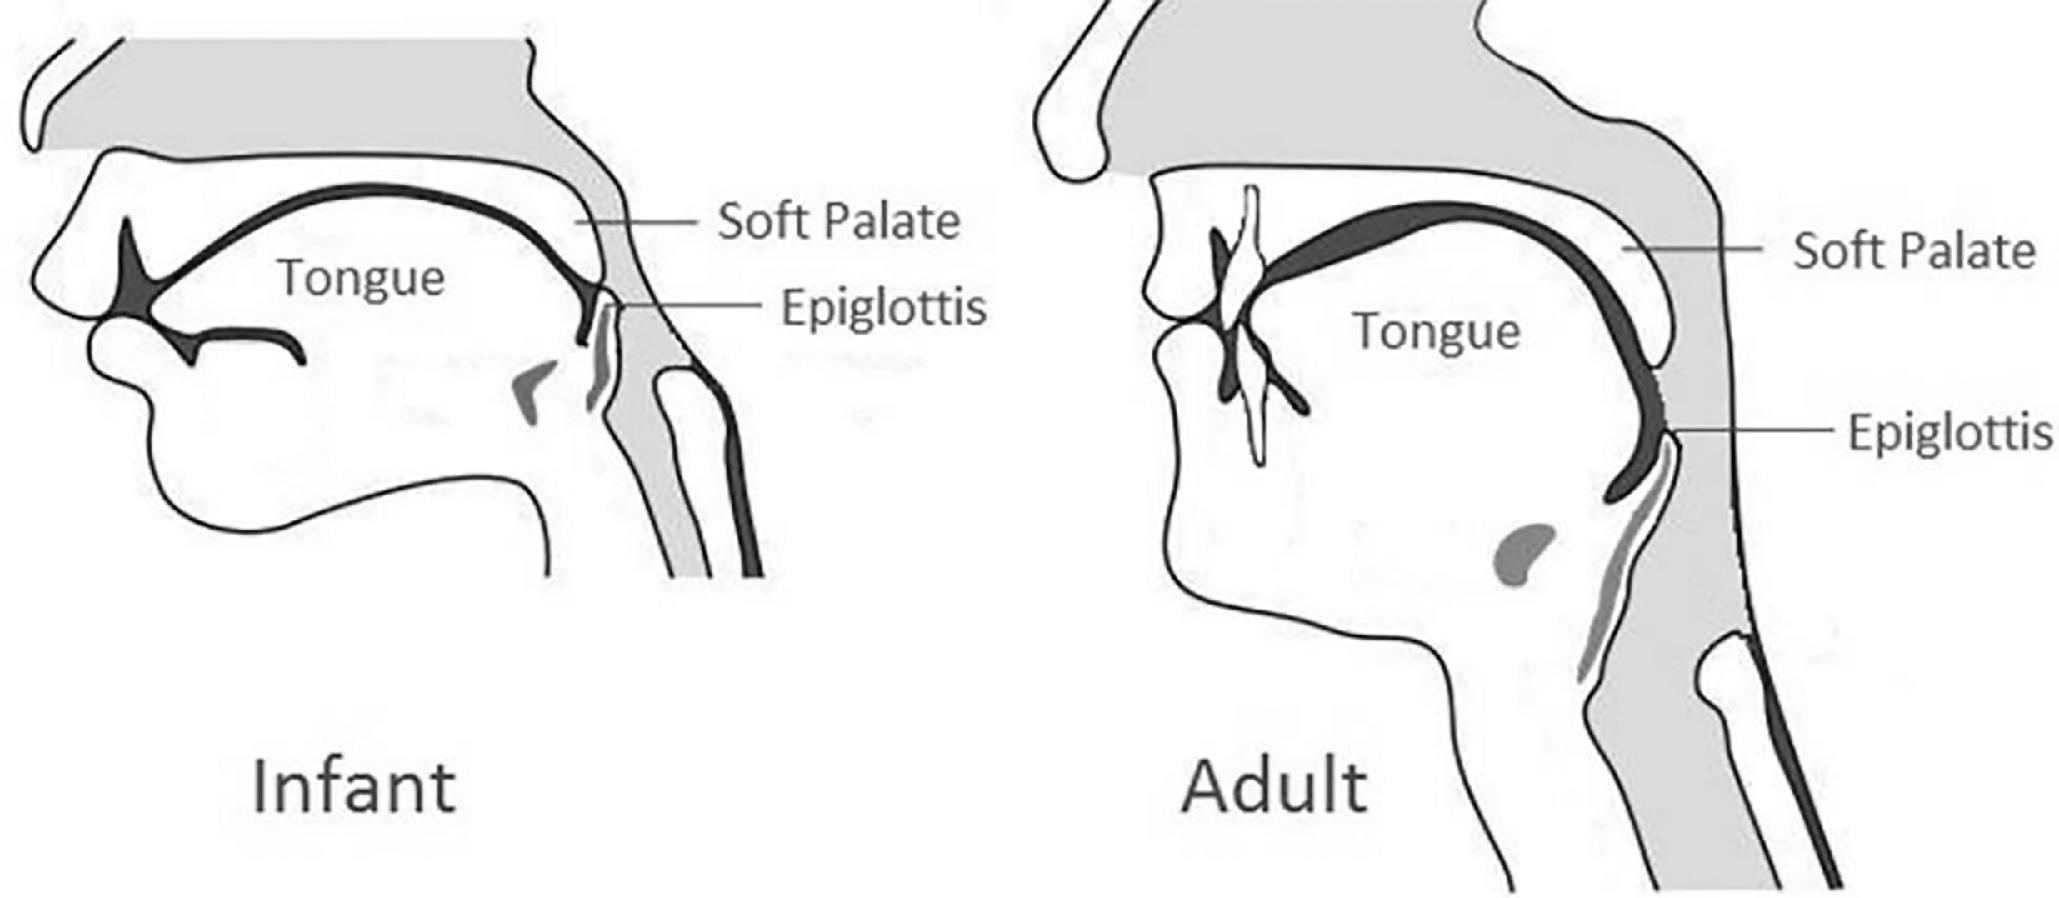 Fig. 70.1, Anatomic Comparison Between the Infant and Adult Airway.